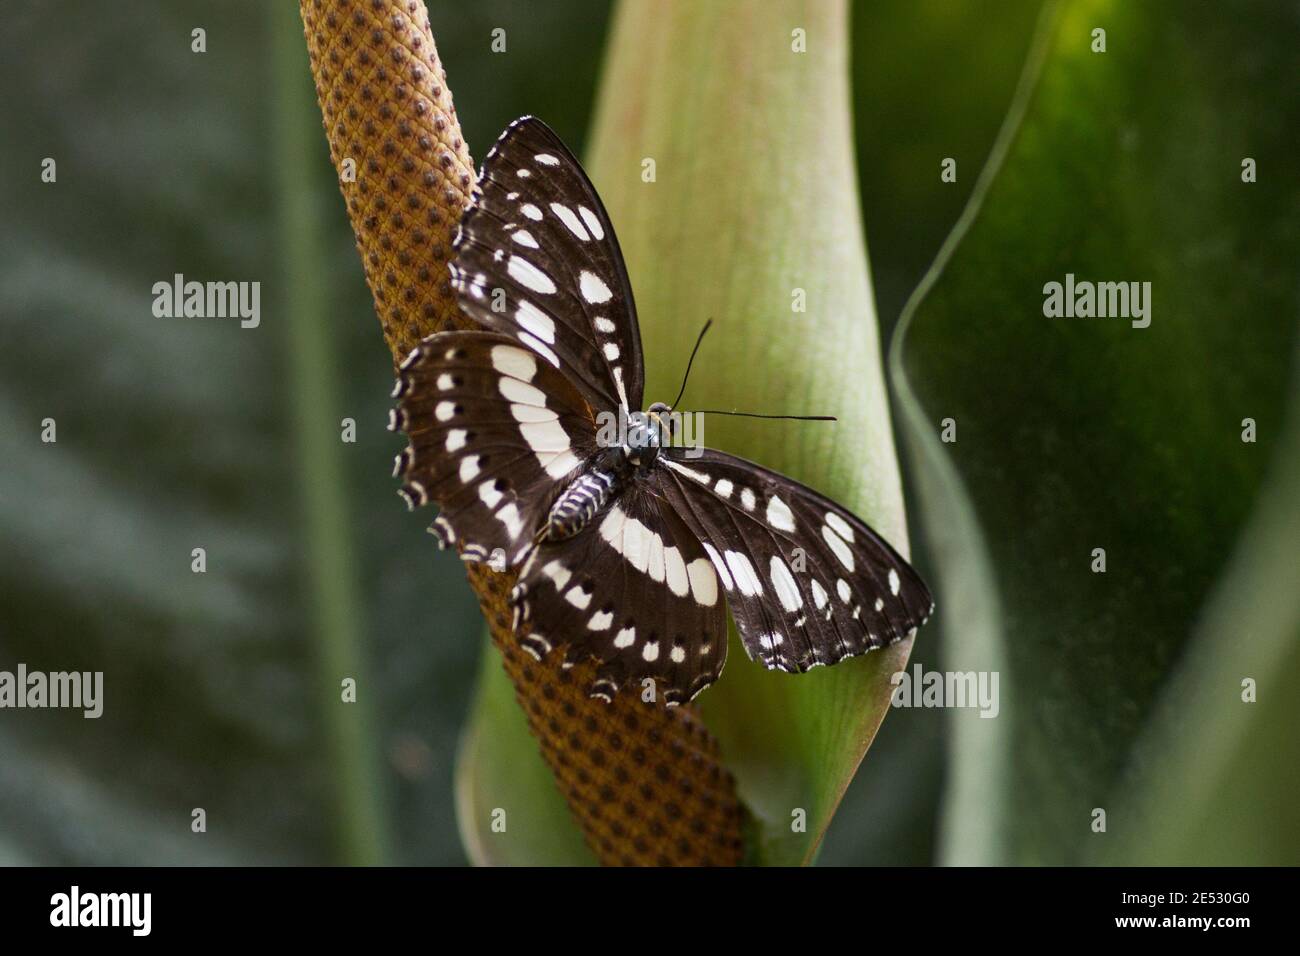 Neptis columella, or short banded sailer, a species of nymphalid butterfly found in South and Southeast Asia, sitting on a tropical plant. Stock Photo